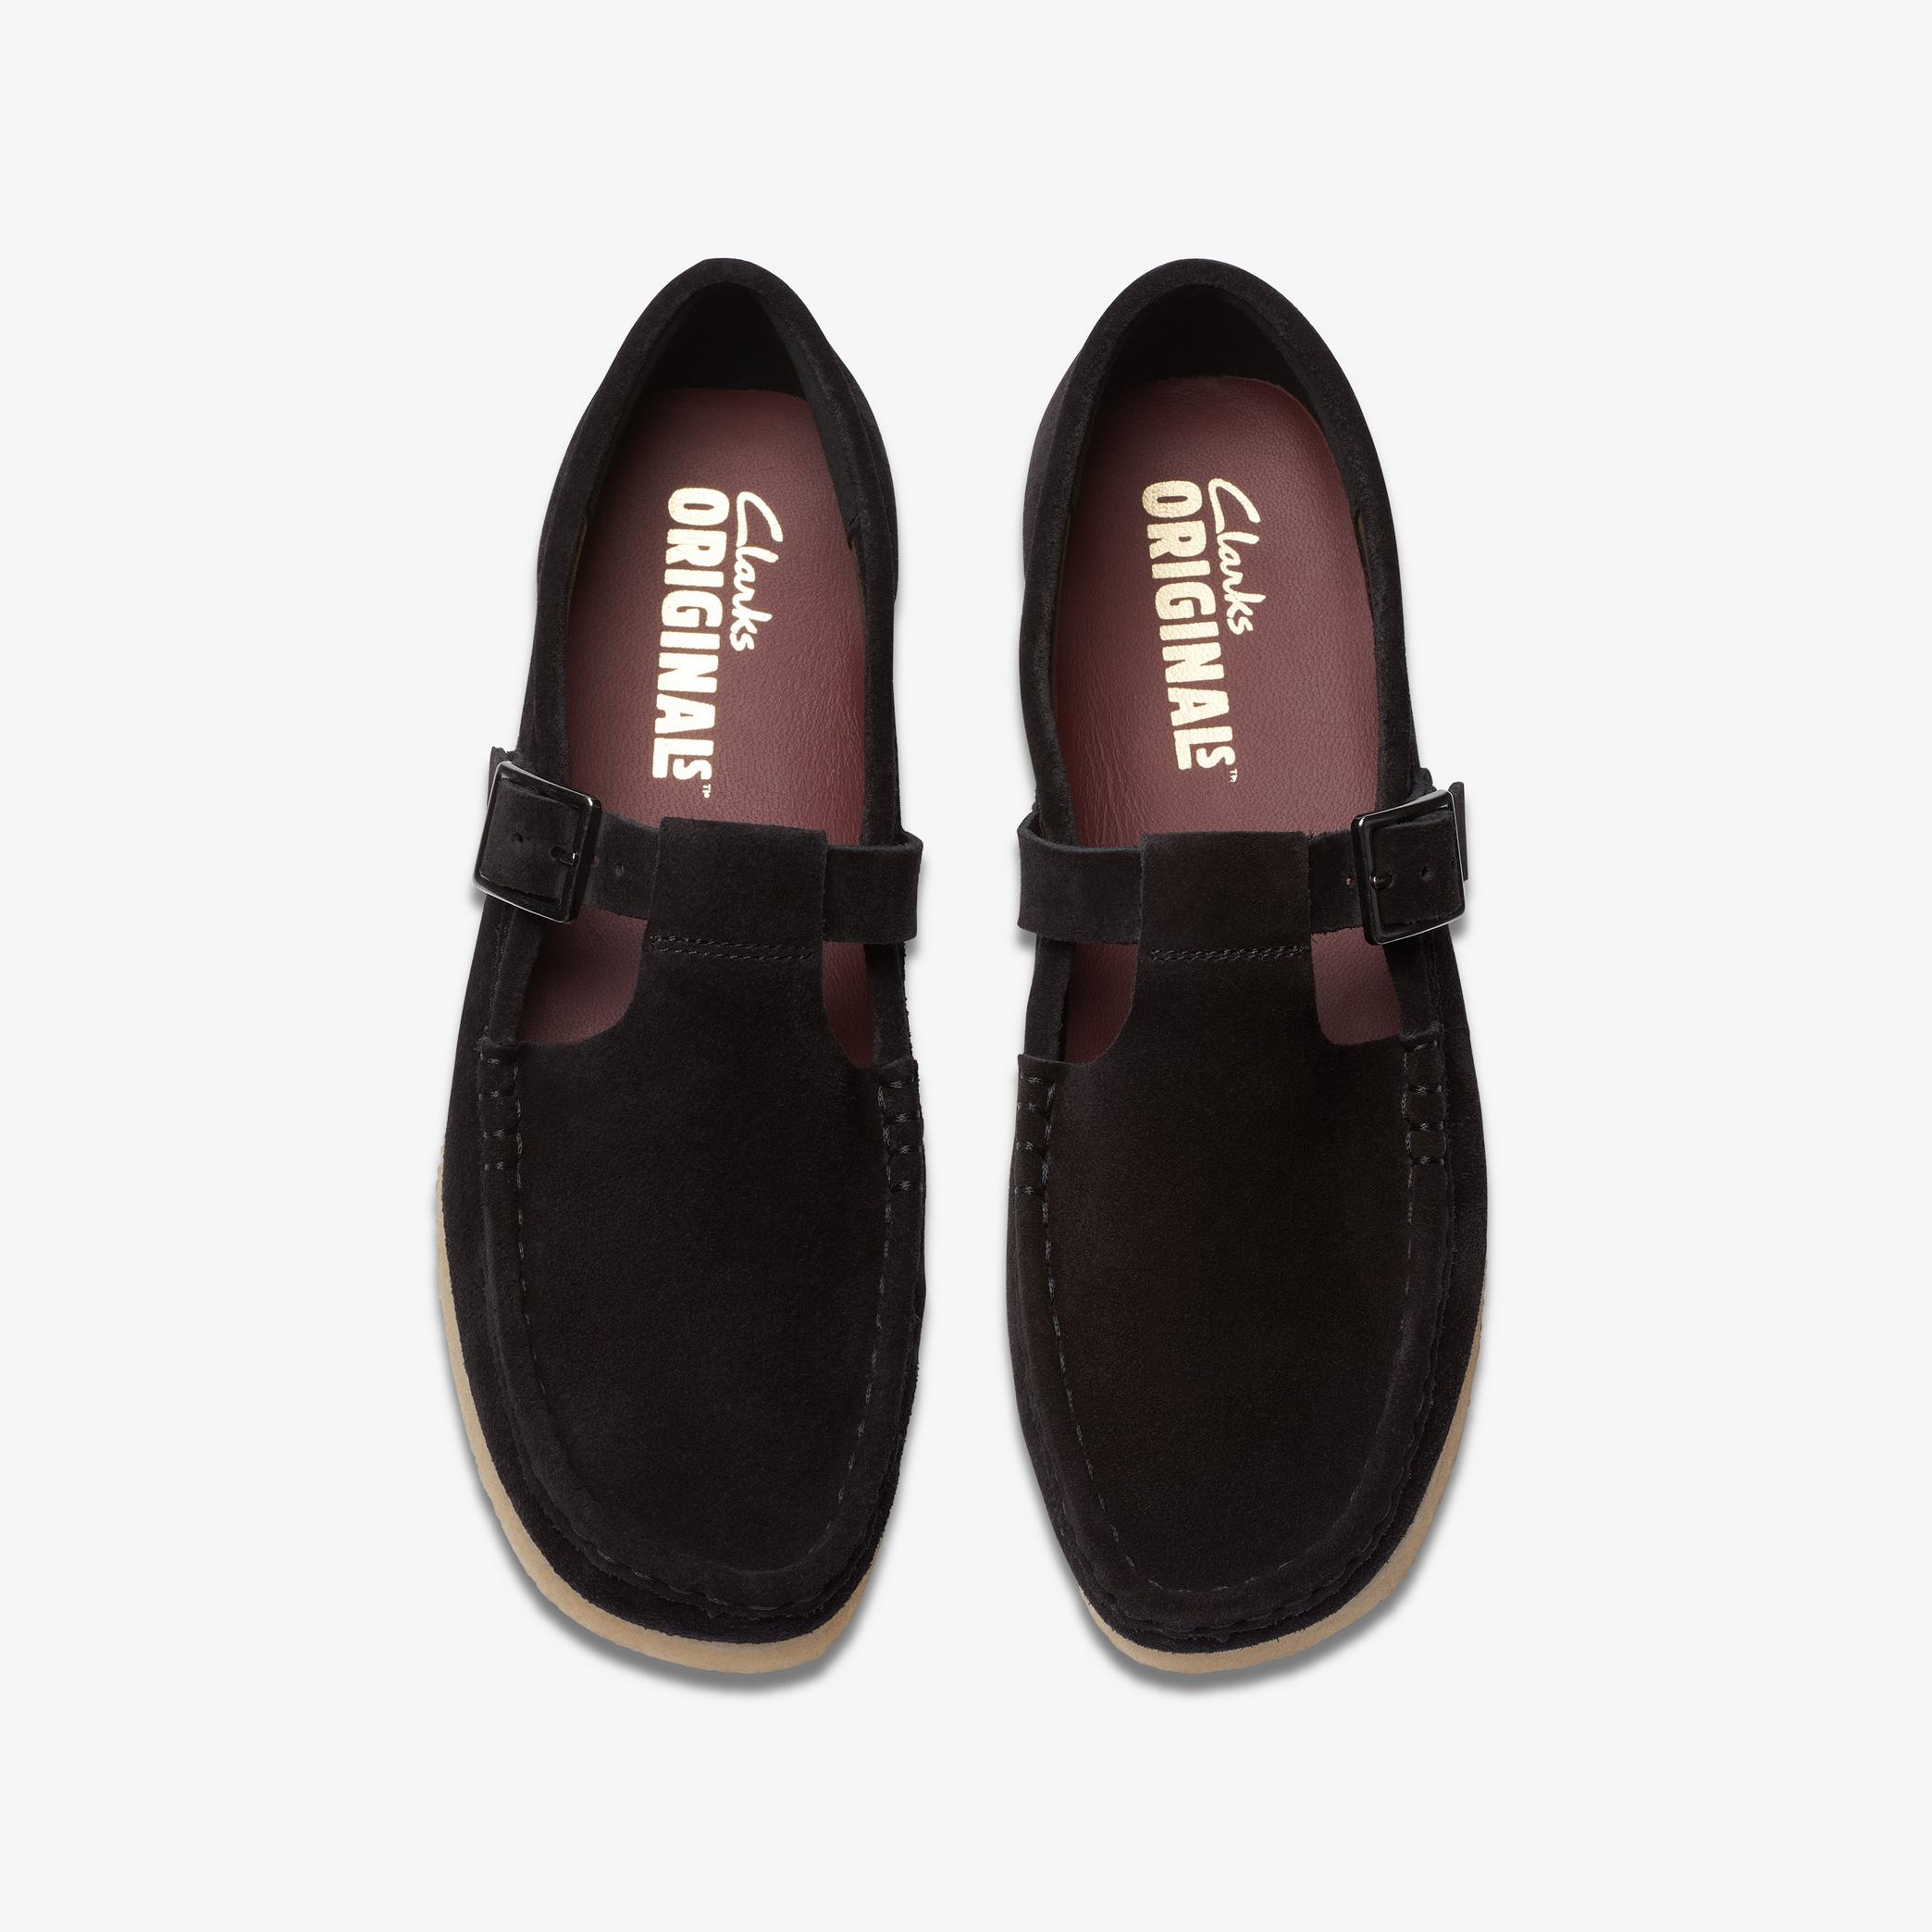 Wallabee T-Bar Black Suede Loafers, view 6 of 6